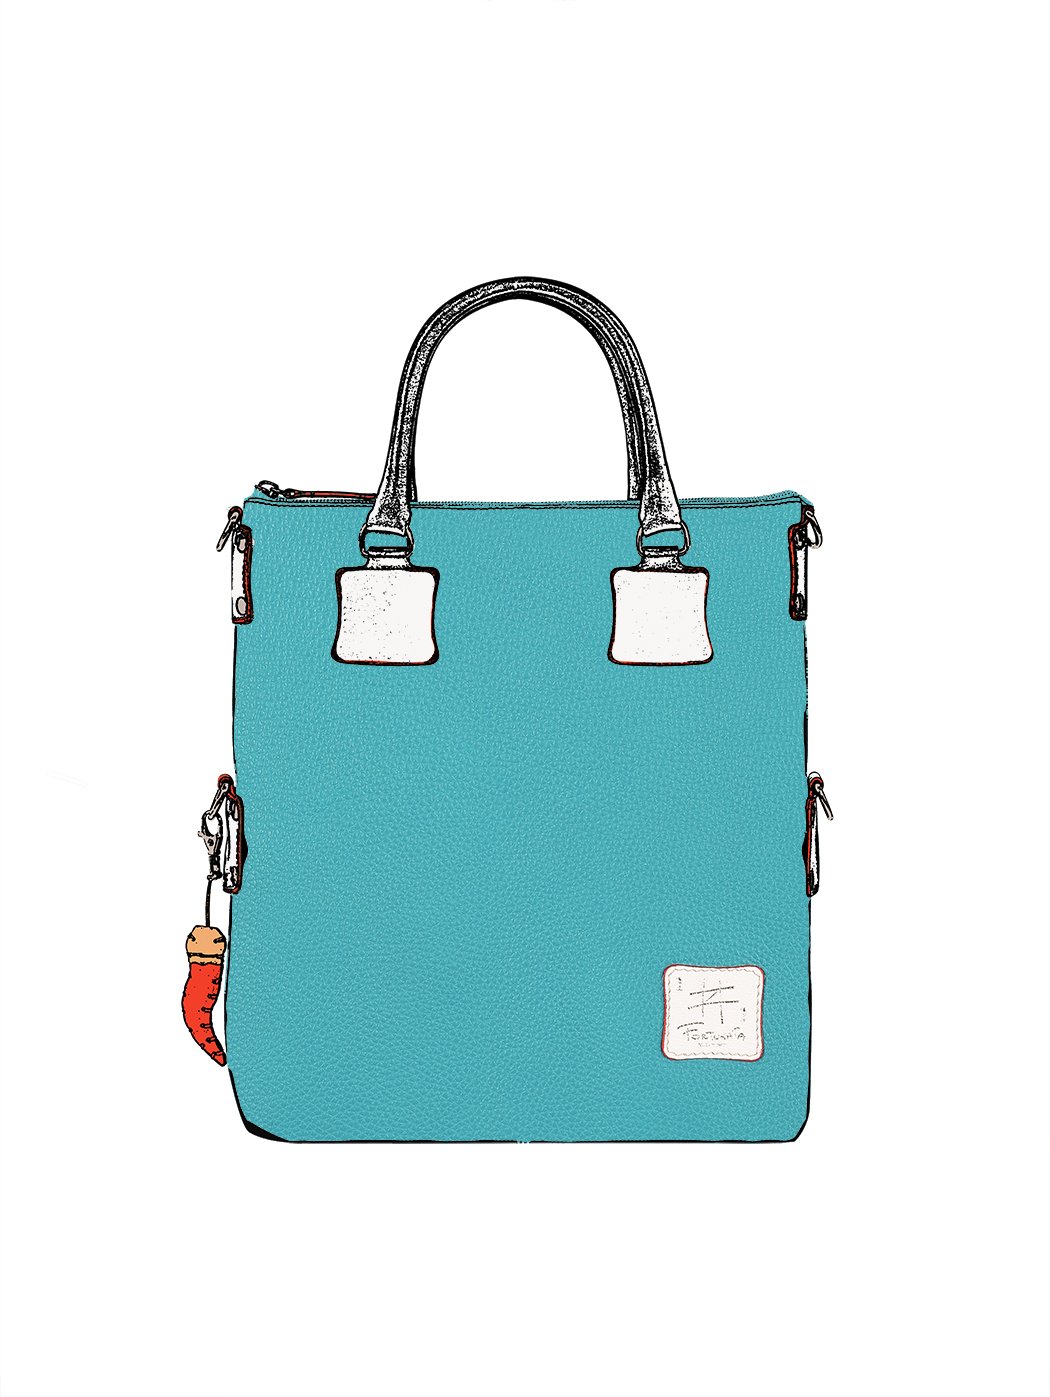 Large Tote Bag in Leather Sky Blue - Handmade in Italy